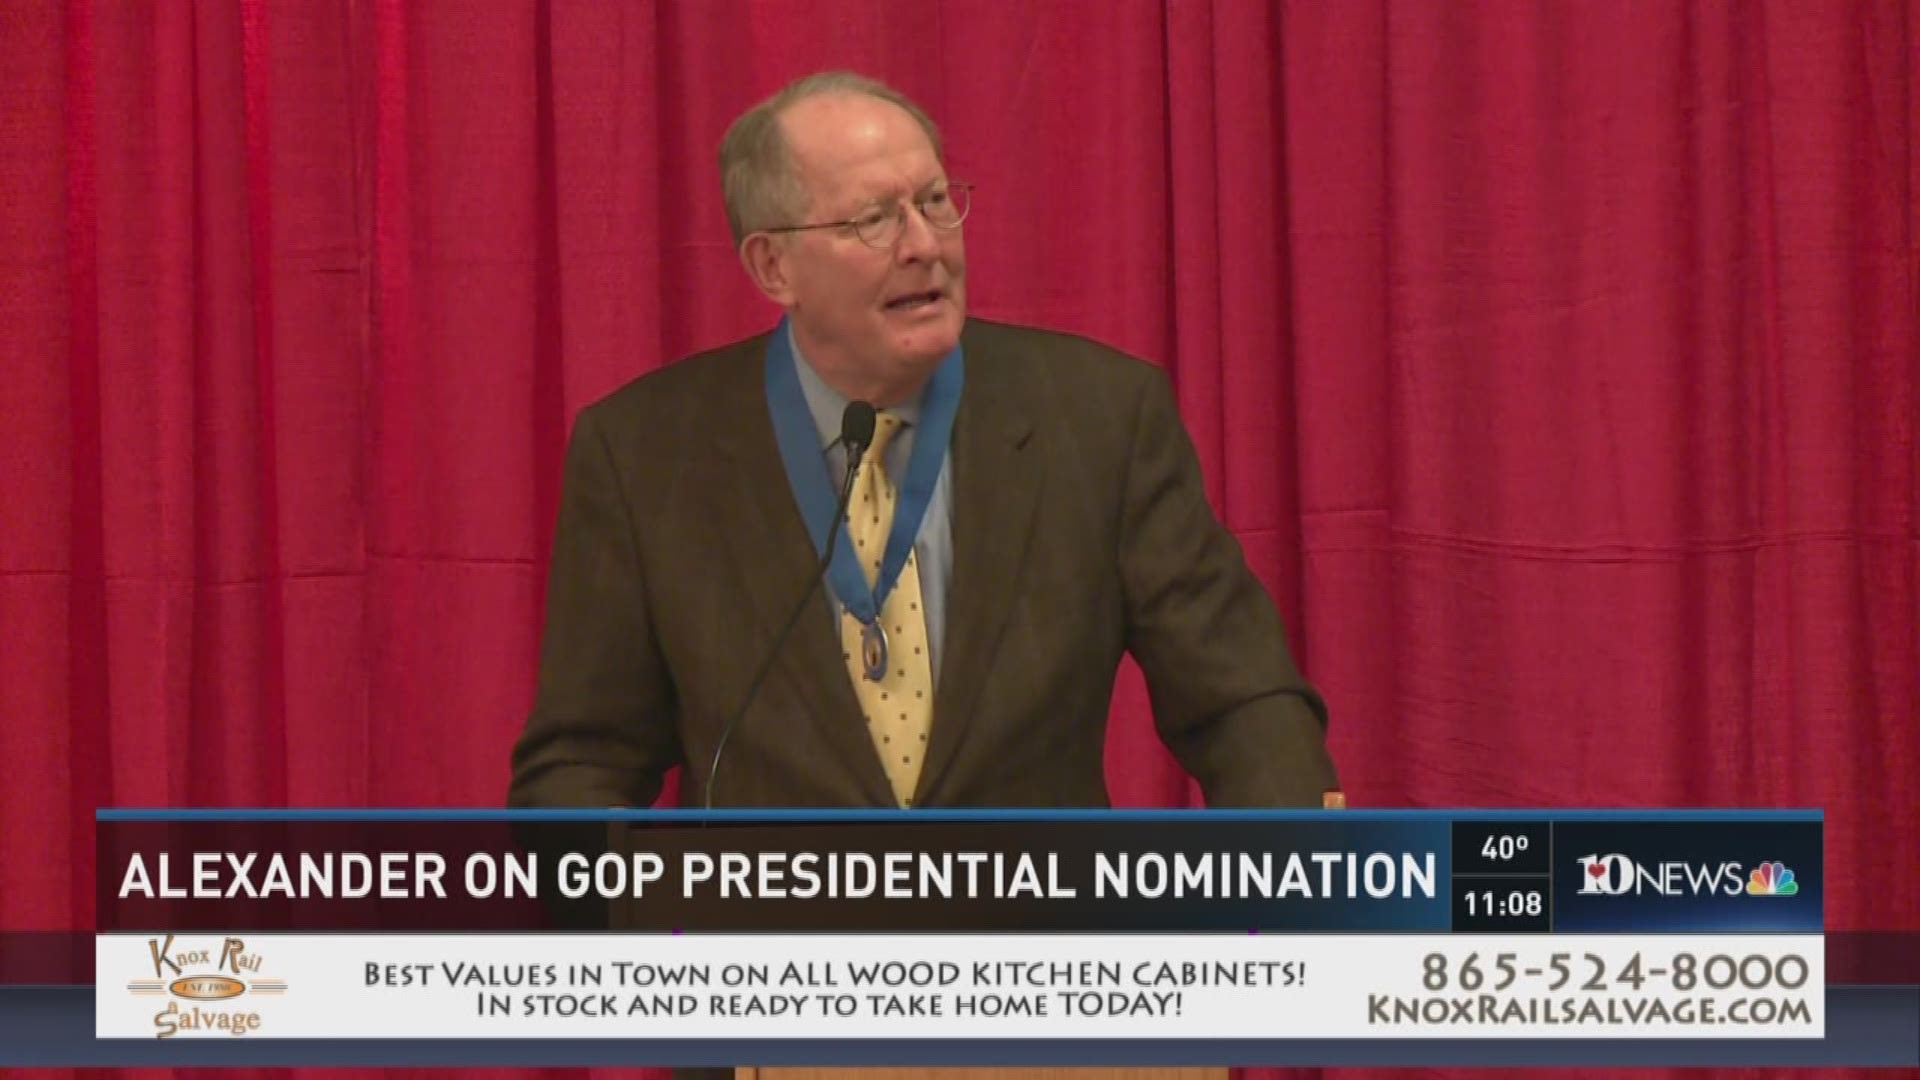 Tennessee Sen. Lamar Alexander, in Knoxville on Friday night, says it's too early to say who should be president. He's backing Marco Rubio. March 4, 2016